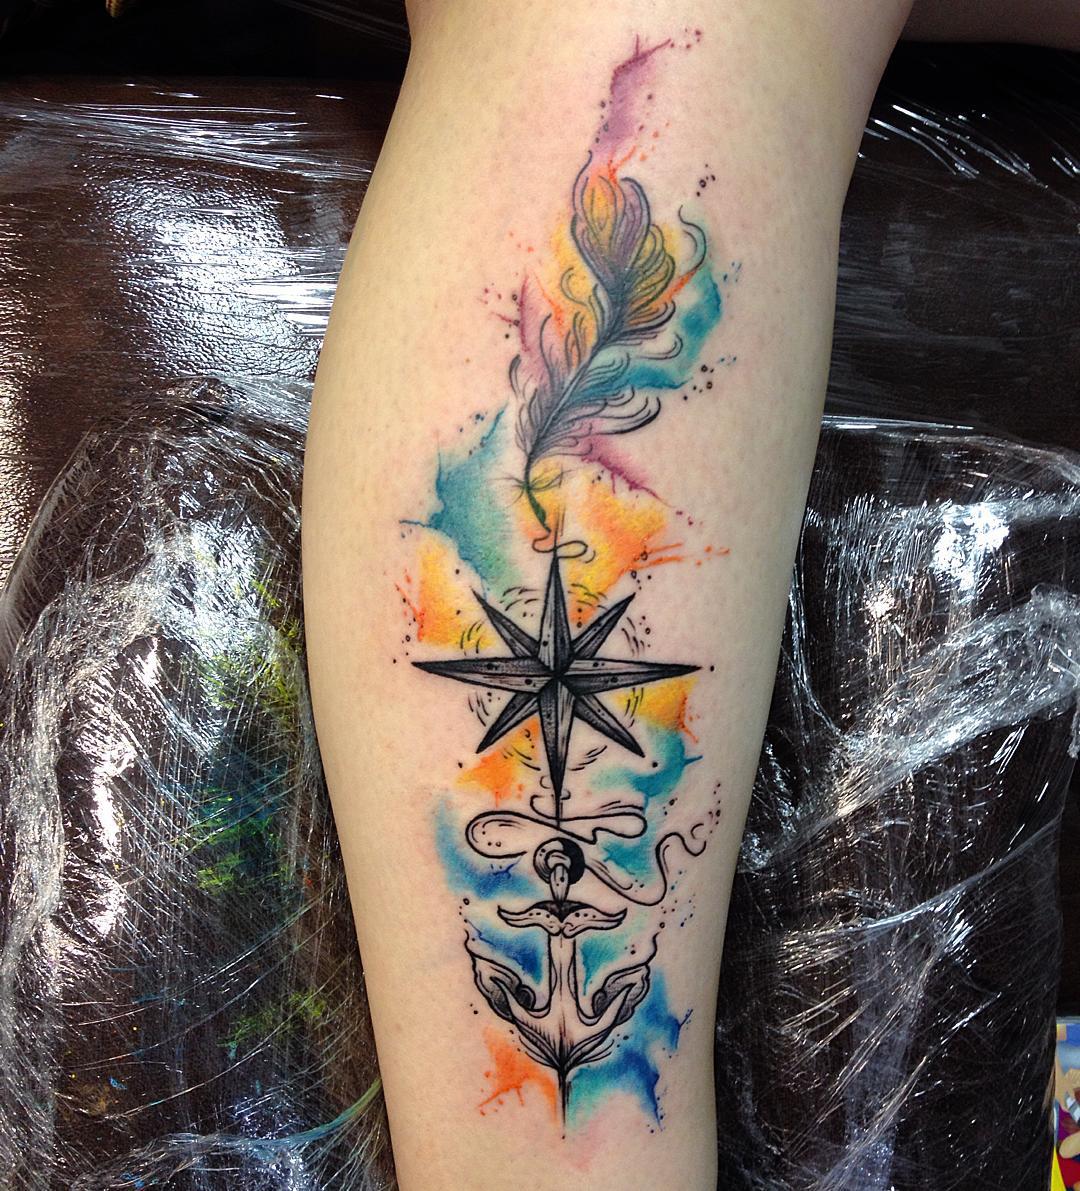 watecolor colorful background tattoo of a nautical star on arm